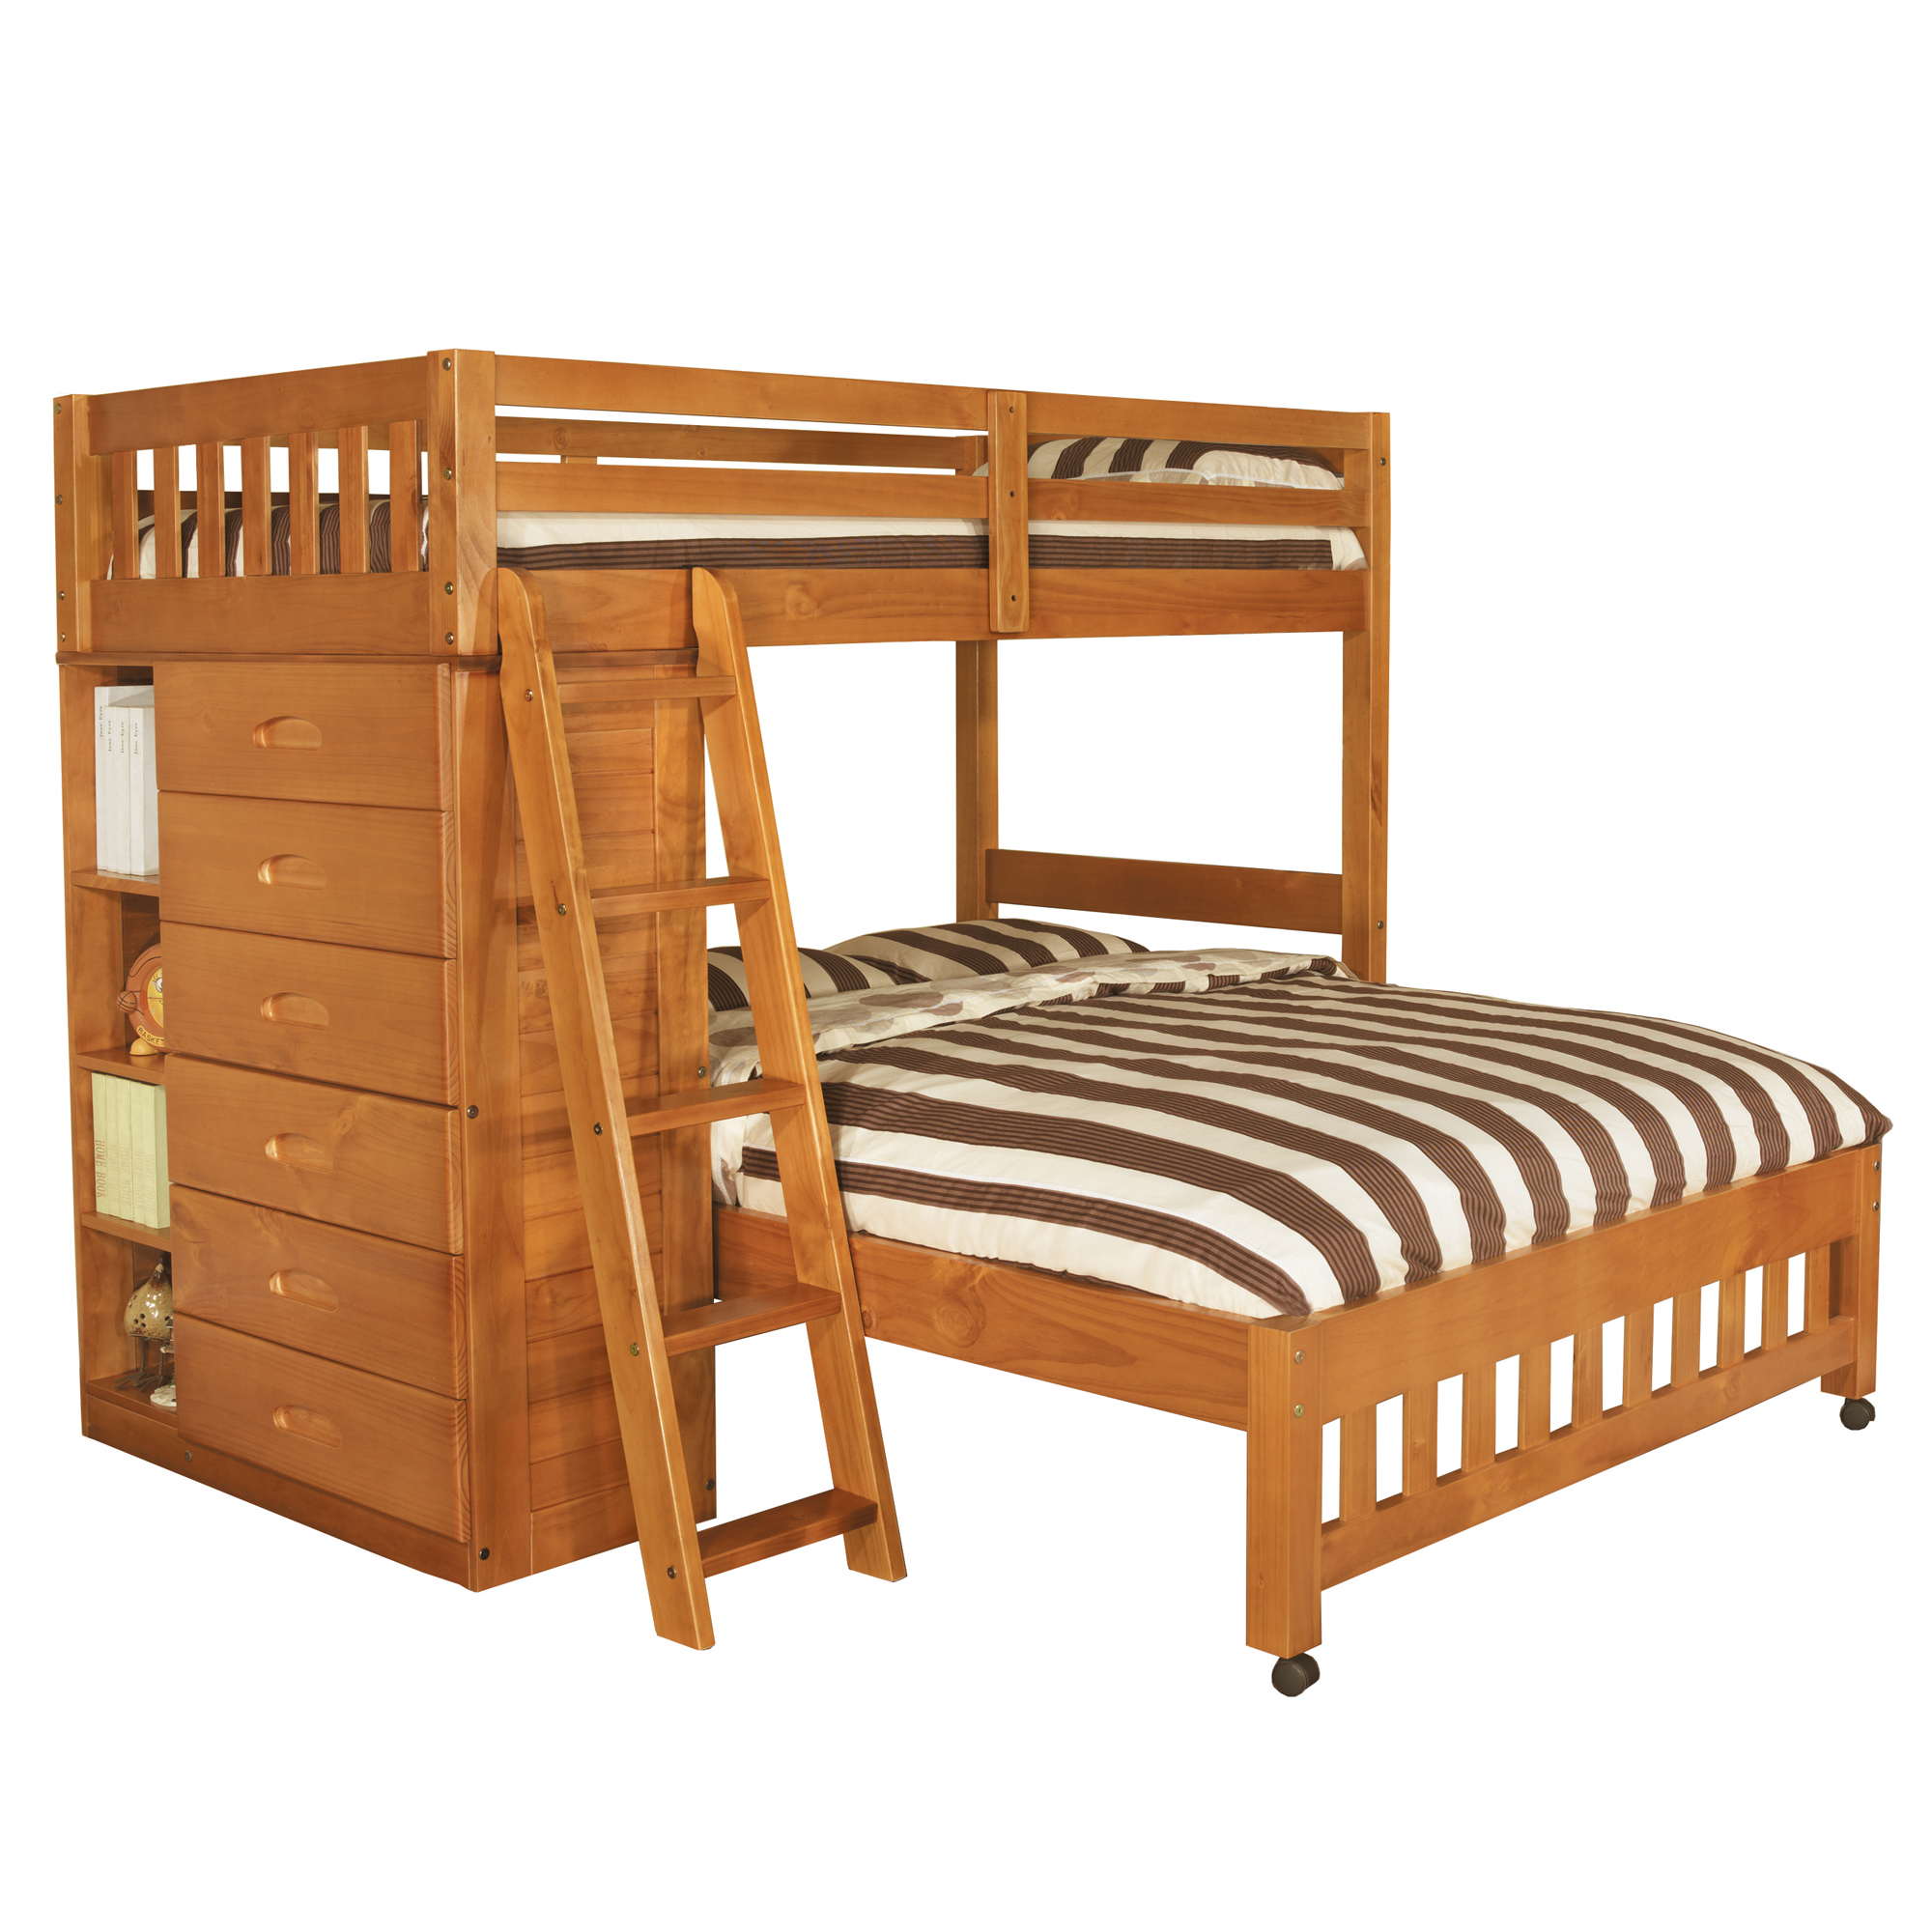 Discovery World Furniture Honey Twin, Viv And Rae Bunk Beds